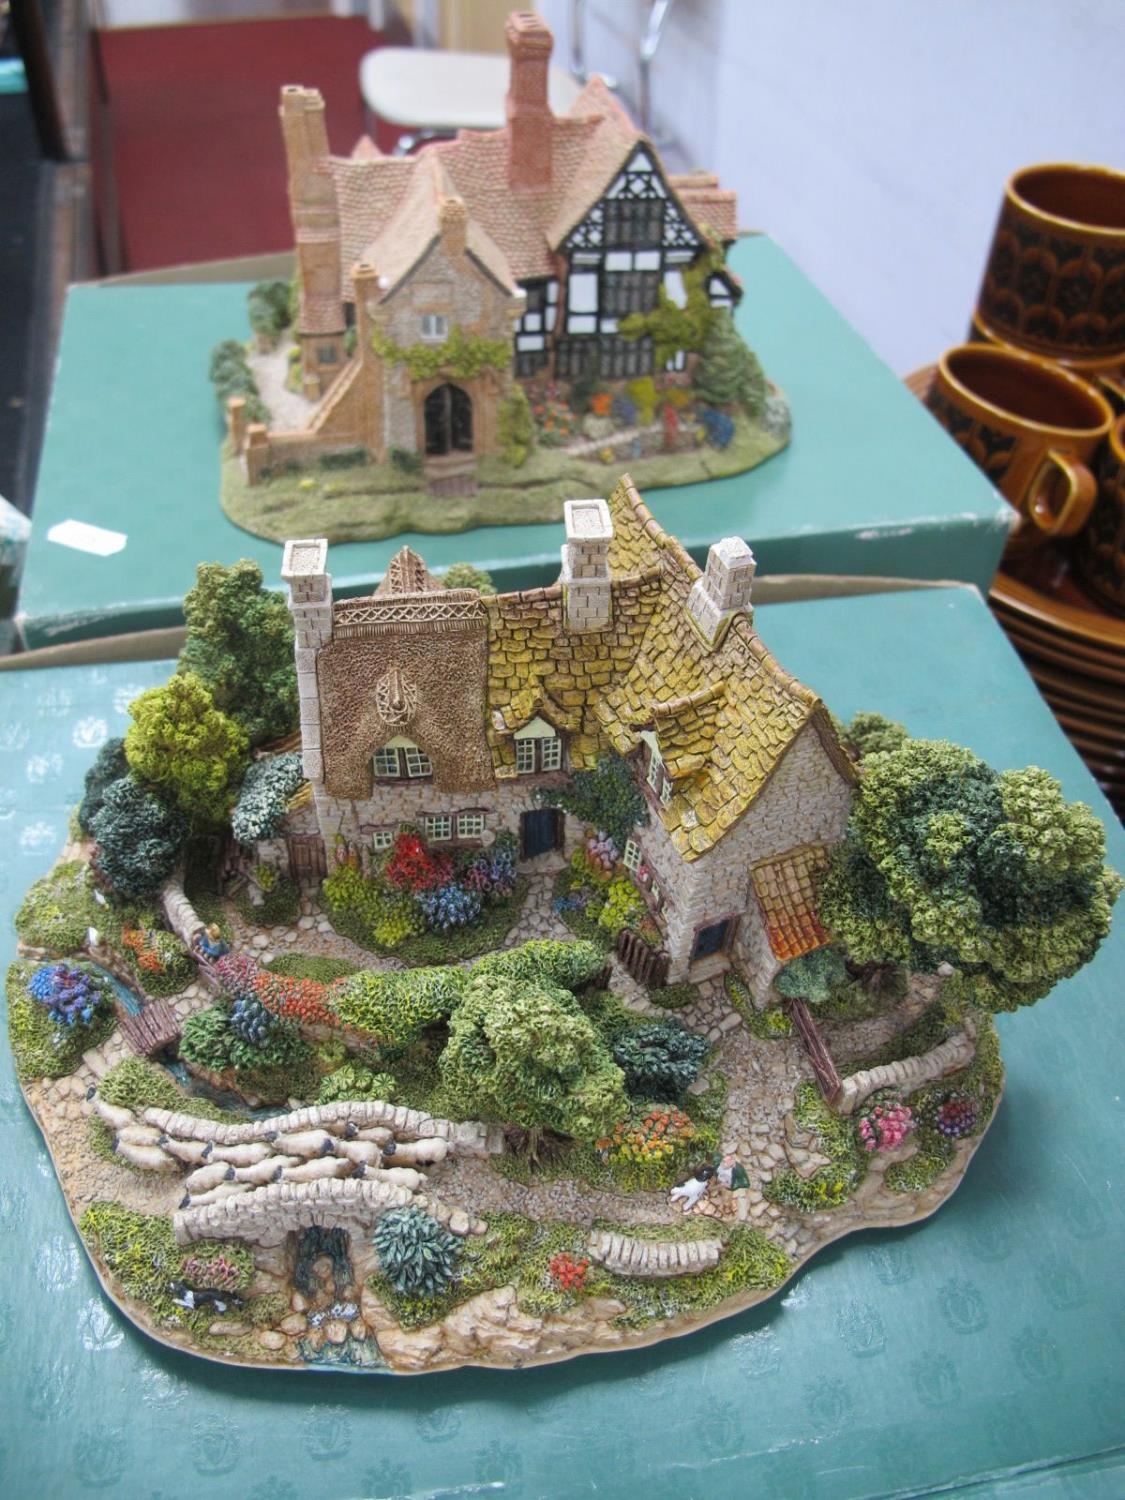 Lilliput Lane, 'Pastures New' and 'Anne of Cleves', boxed.